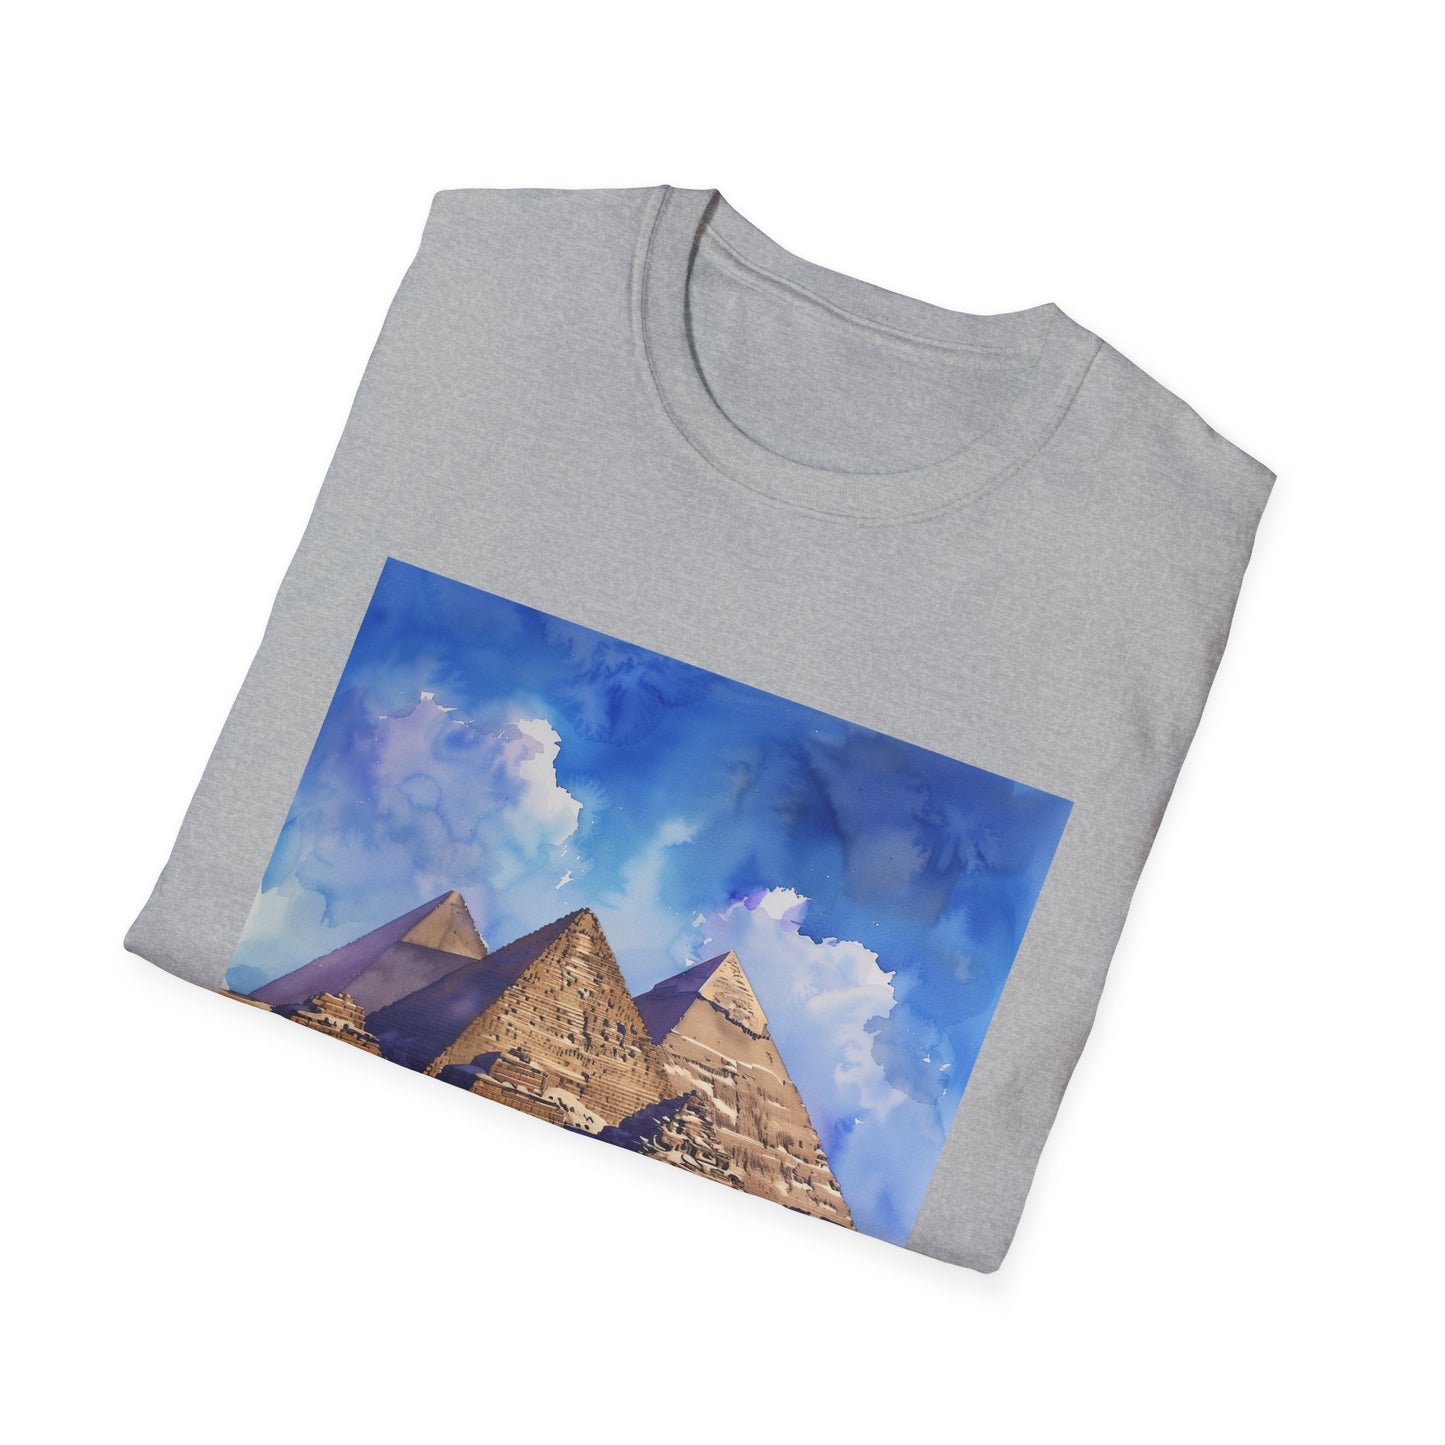 ## Ancient Wonders in Watercolor: The Egyptian Pyramids T-shirt